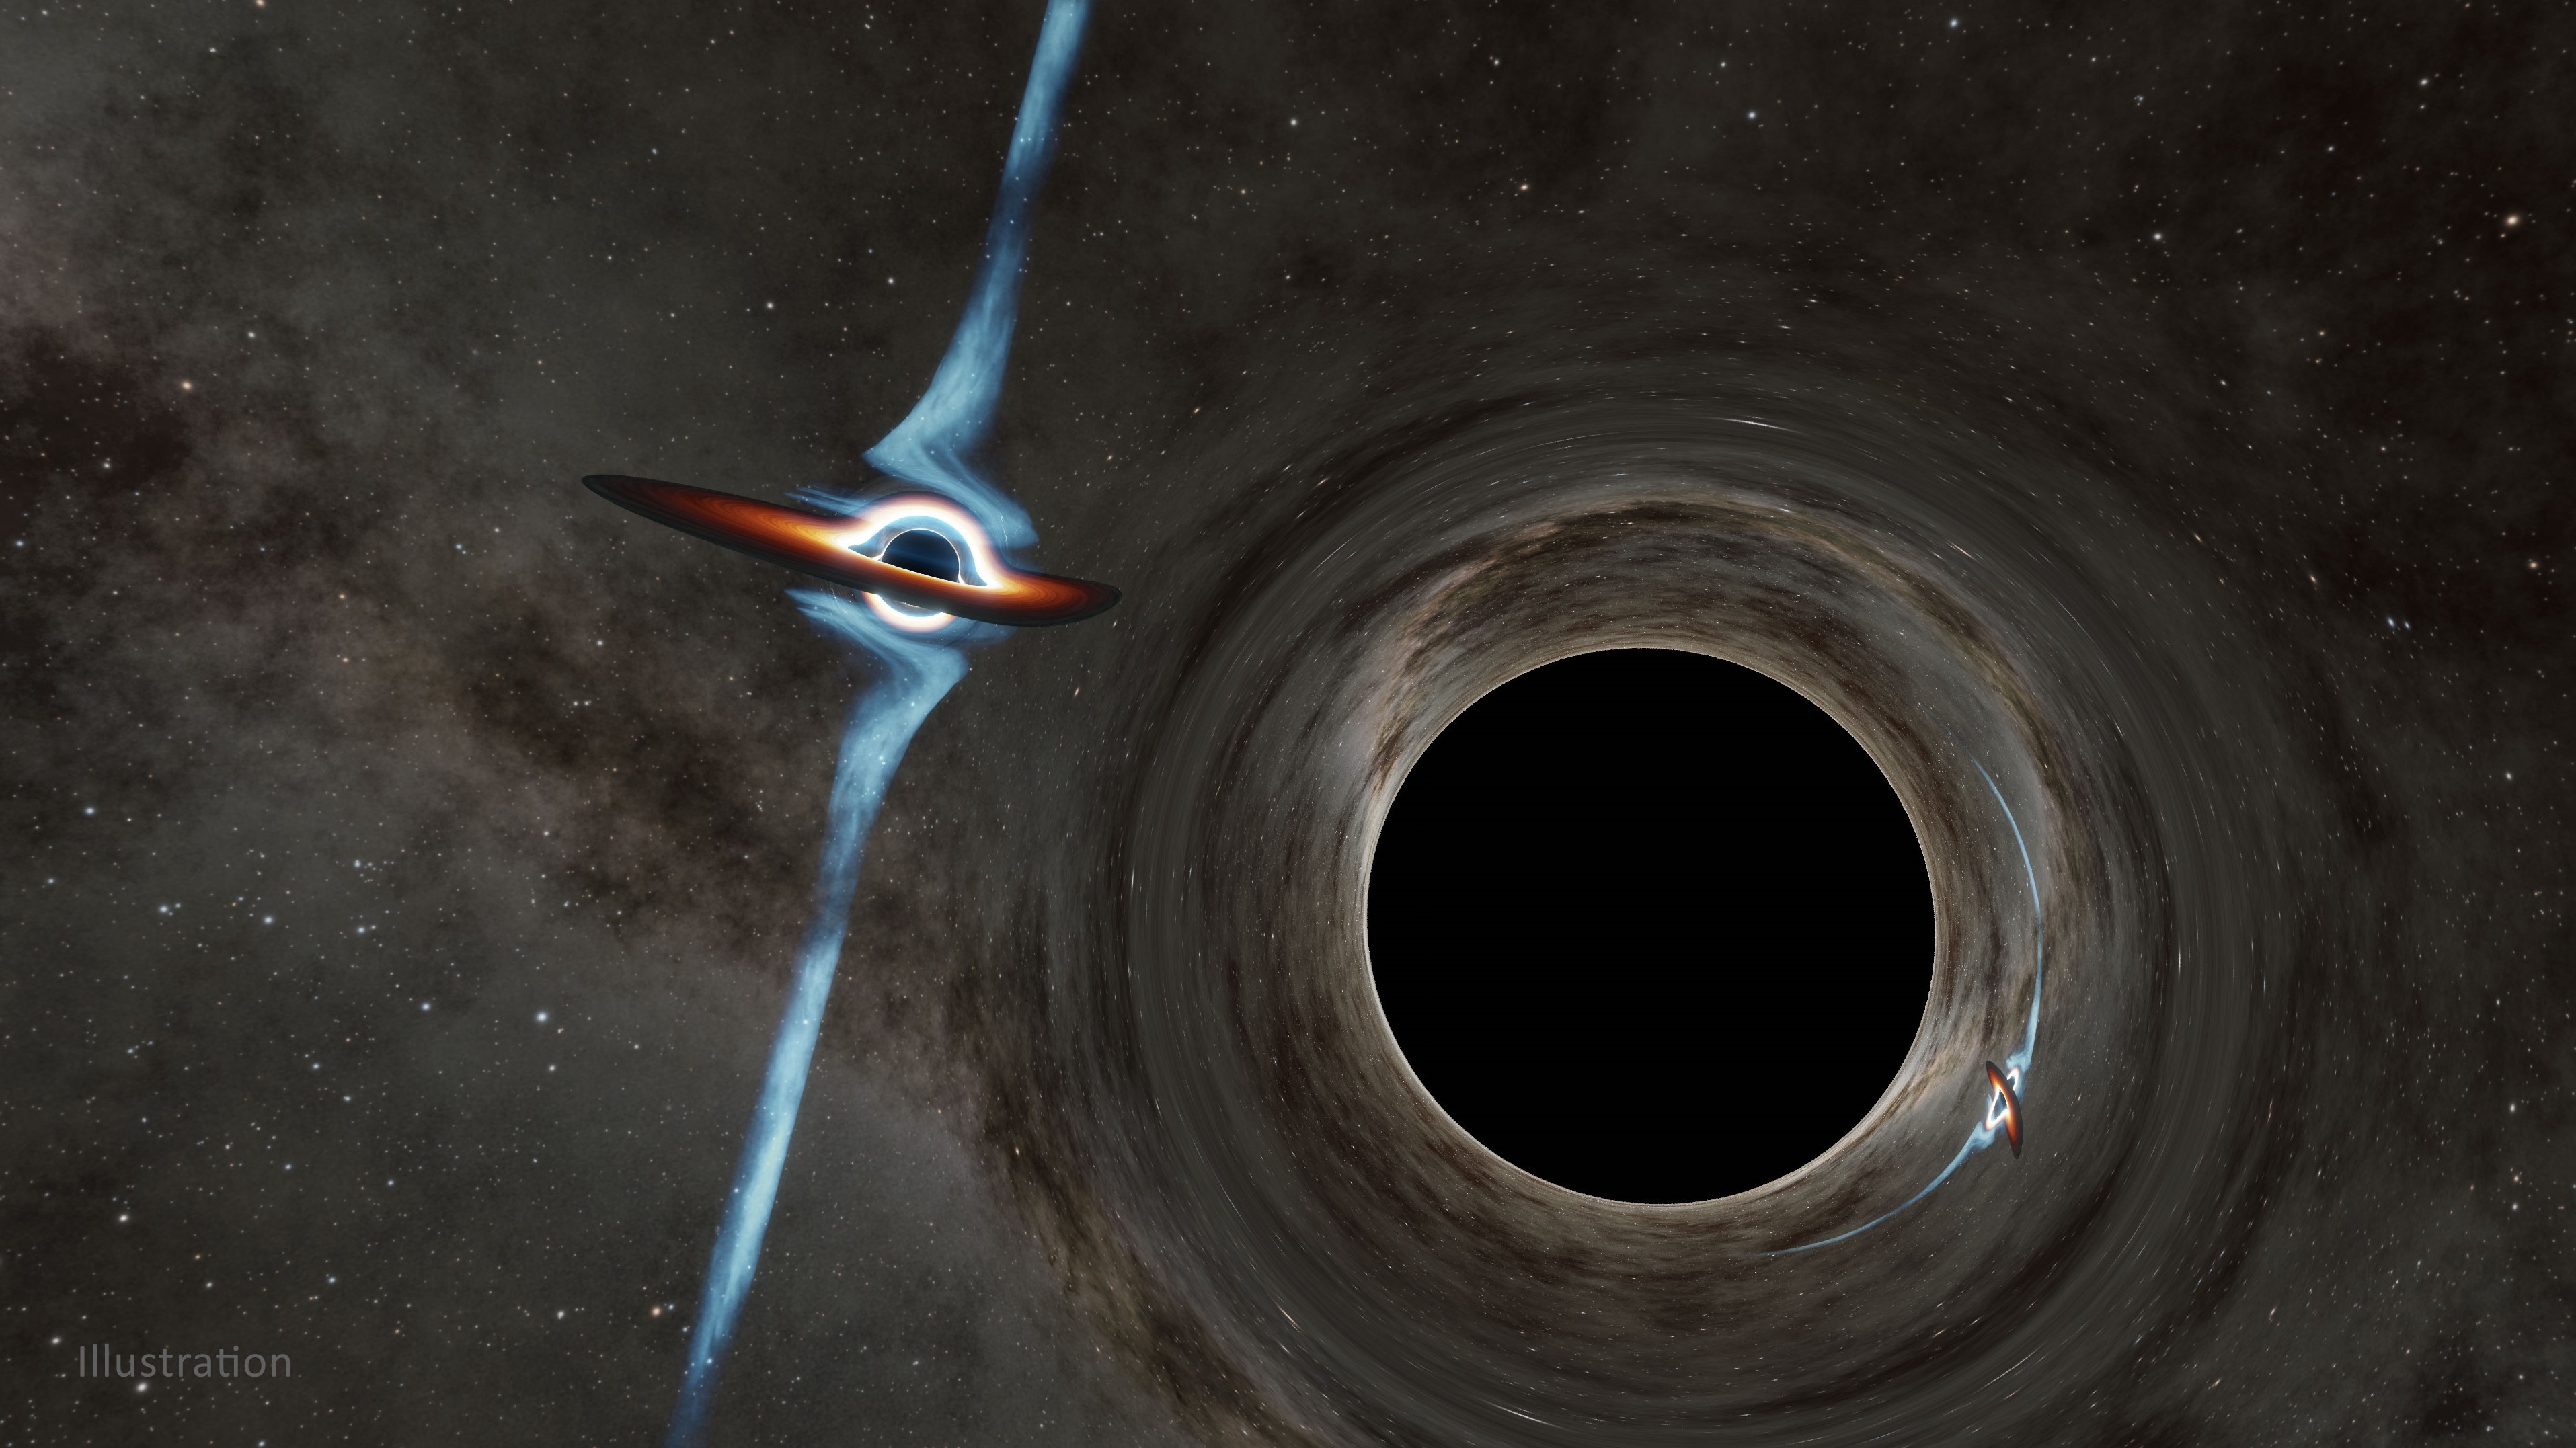 Artist's illustration of a supermassive black hole with a companion black hole orbiting around it.